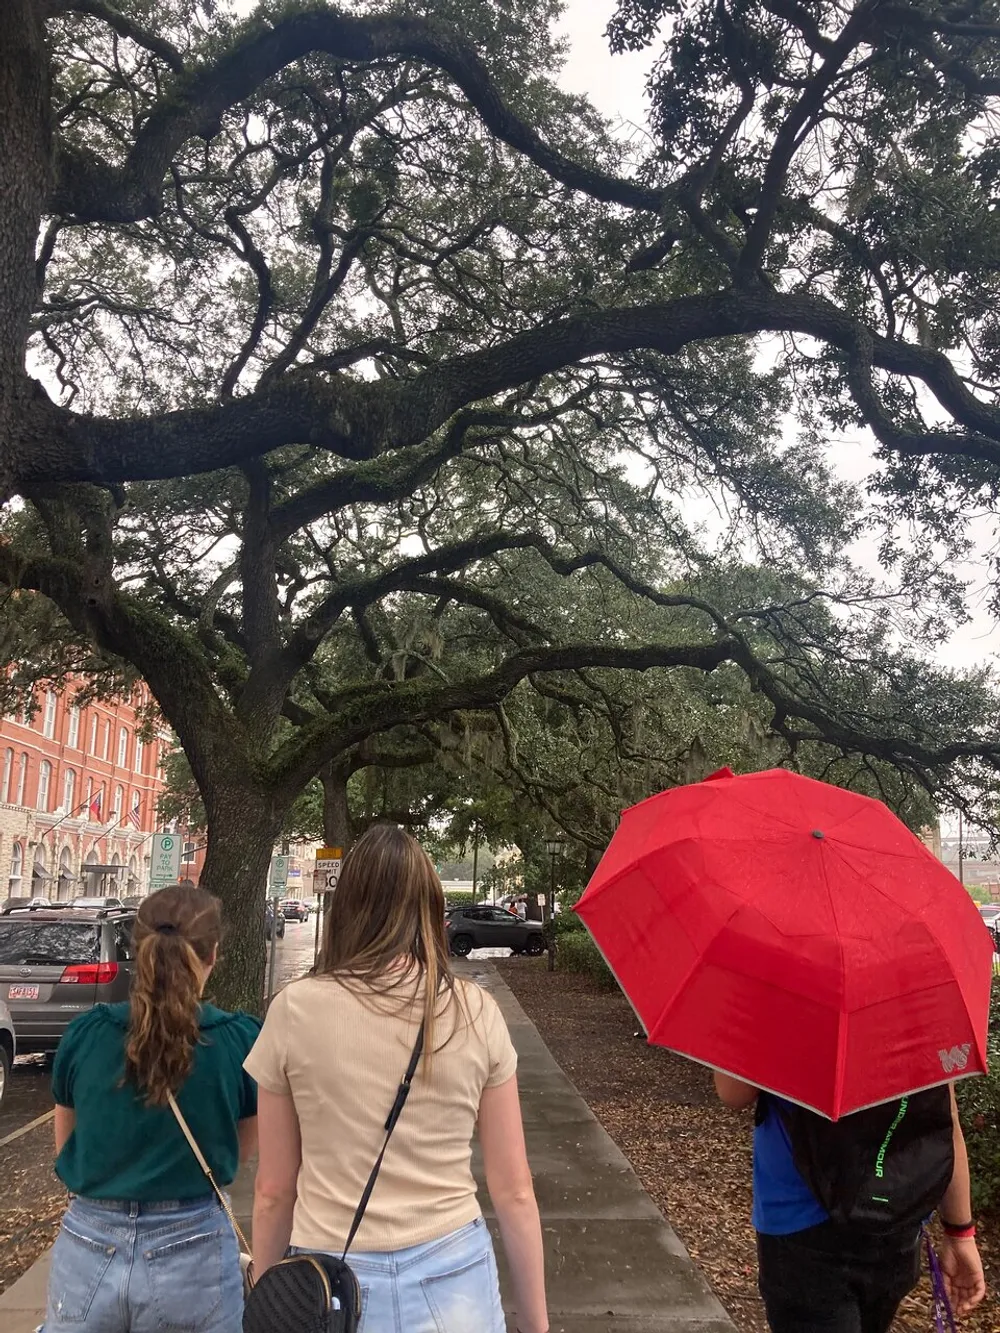 Three people are walking under a canopy of live oak trees on a streetscape with one person holding a red umbrella